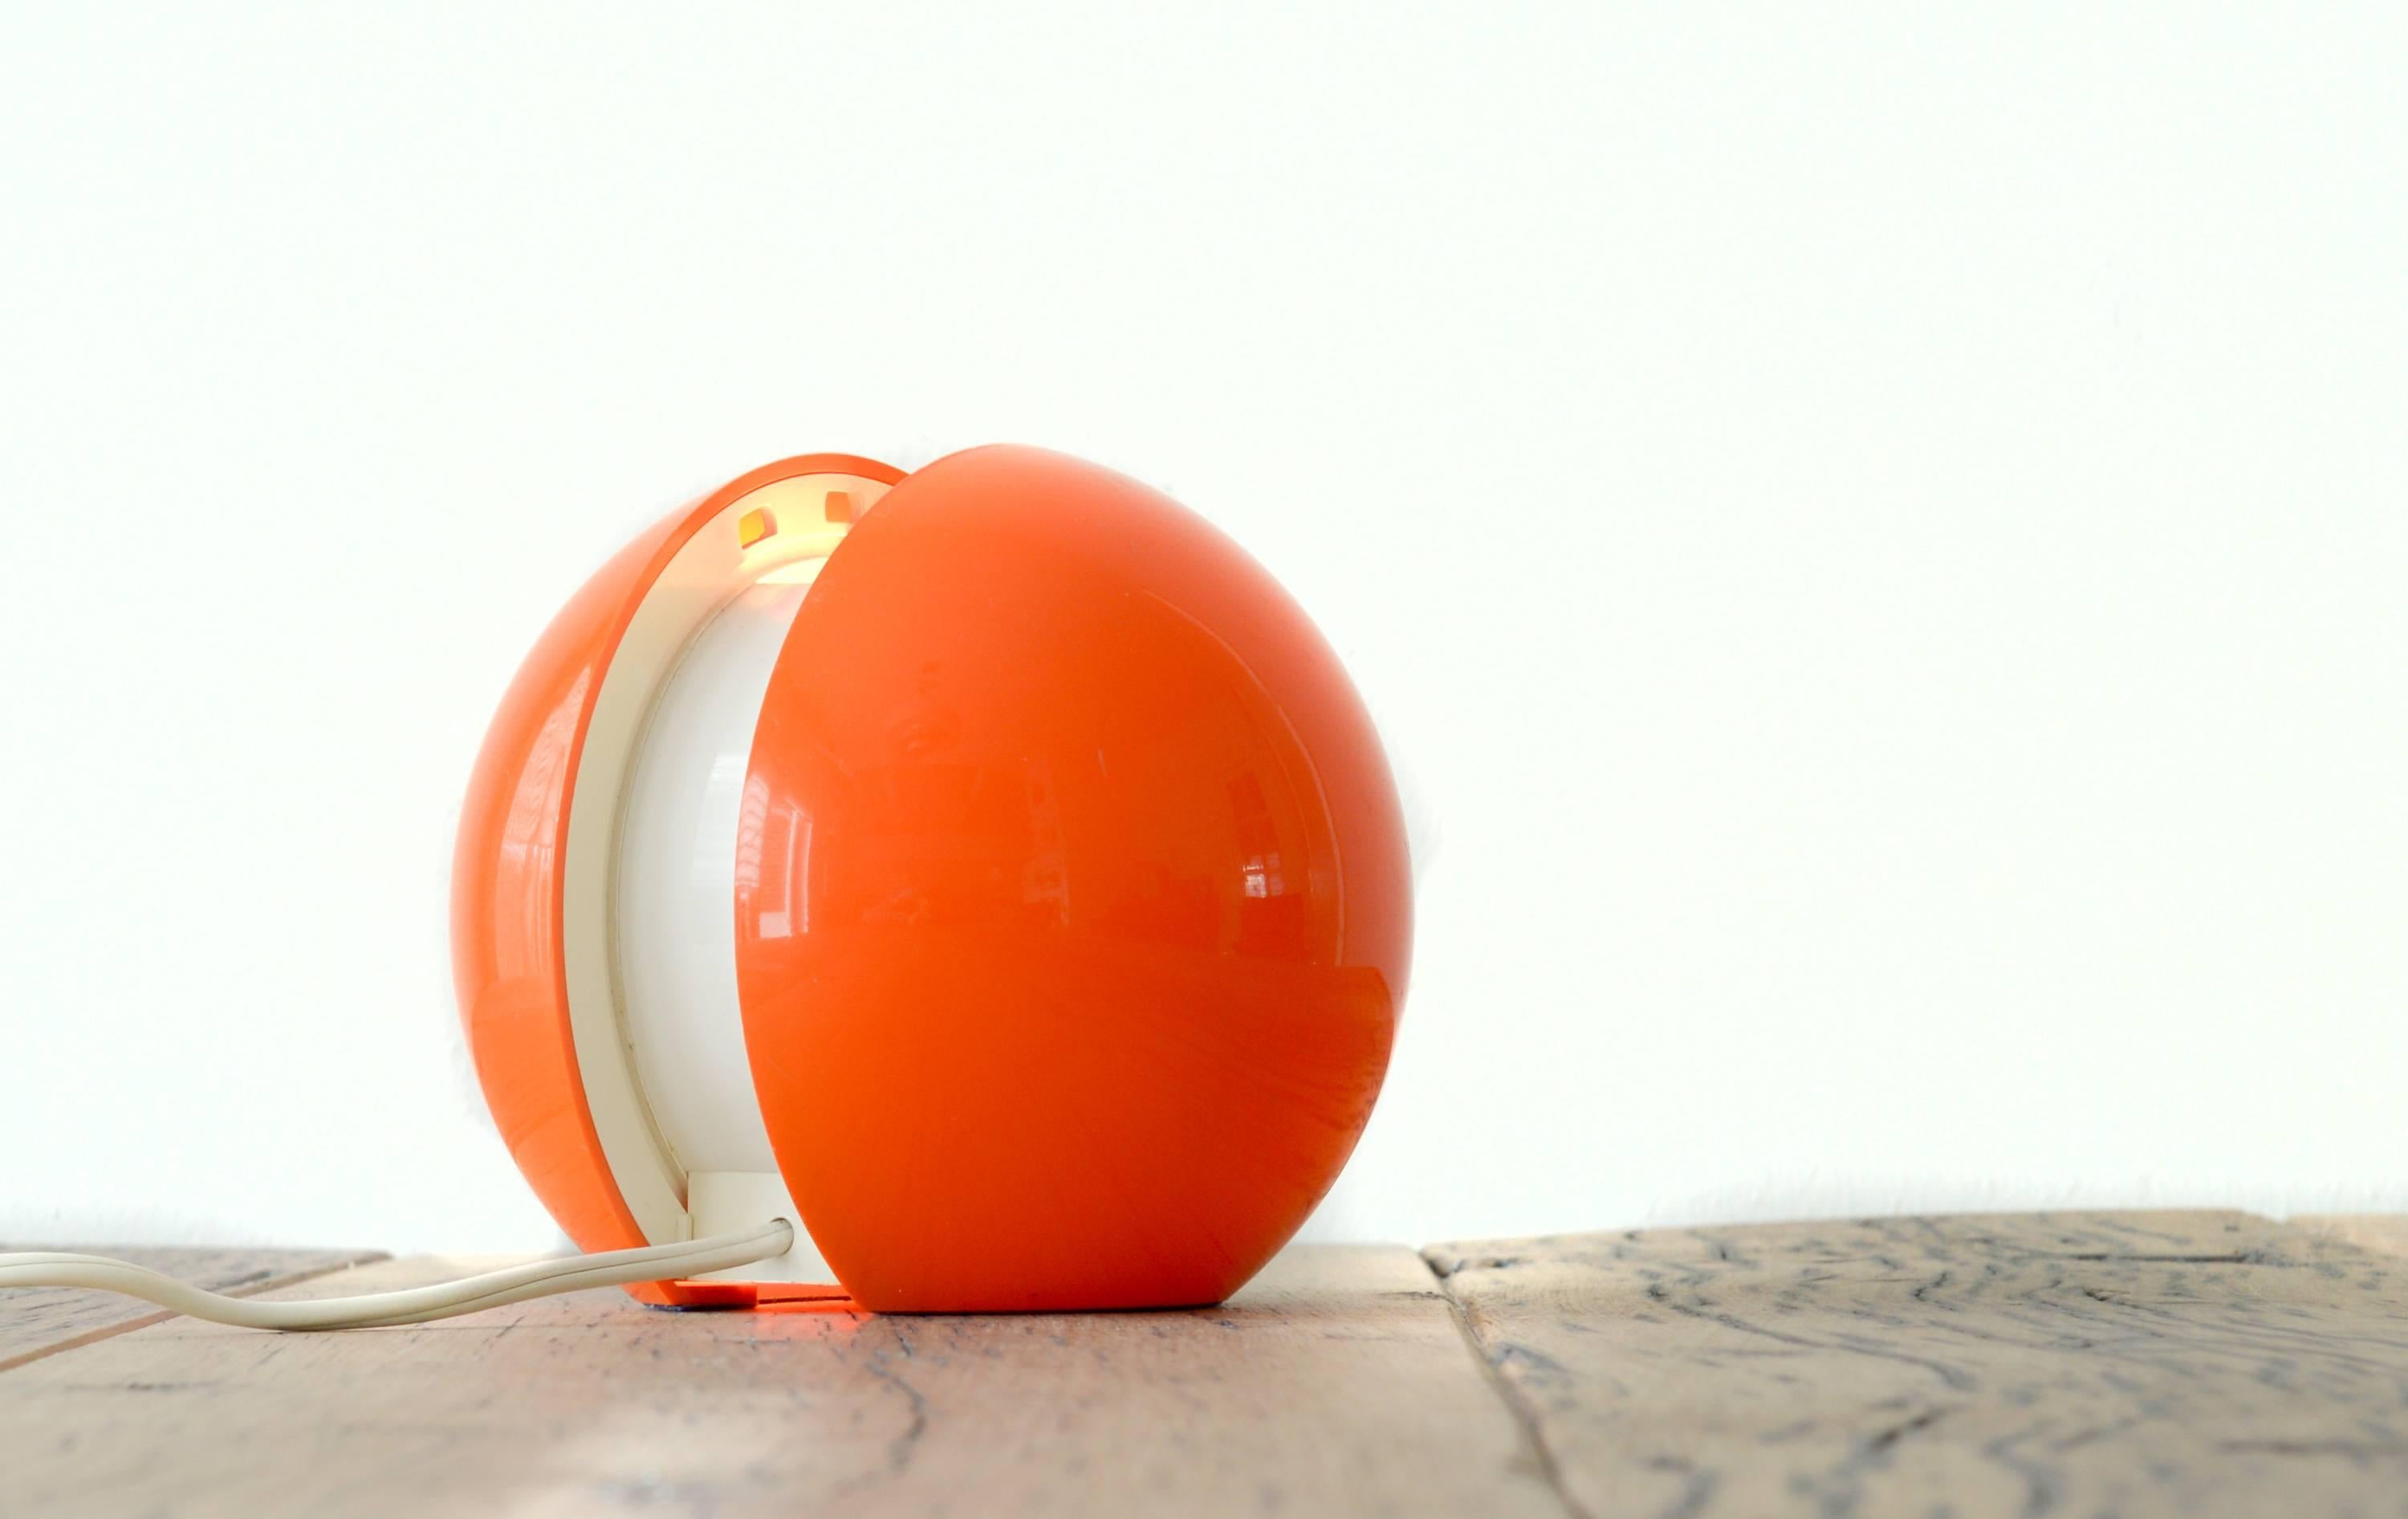 Rare GEA lamp, designed, circa 1970 by Gianni Colombo for Arredoluce Monza Italy.

Moldes orange plastic form with a white sliding difusser to control light emission.

Diameter 16 cm.